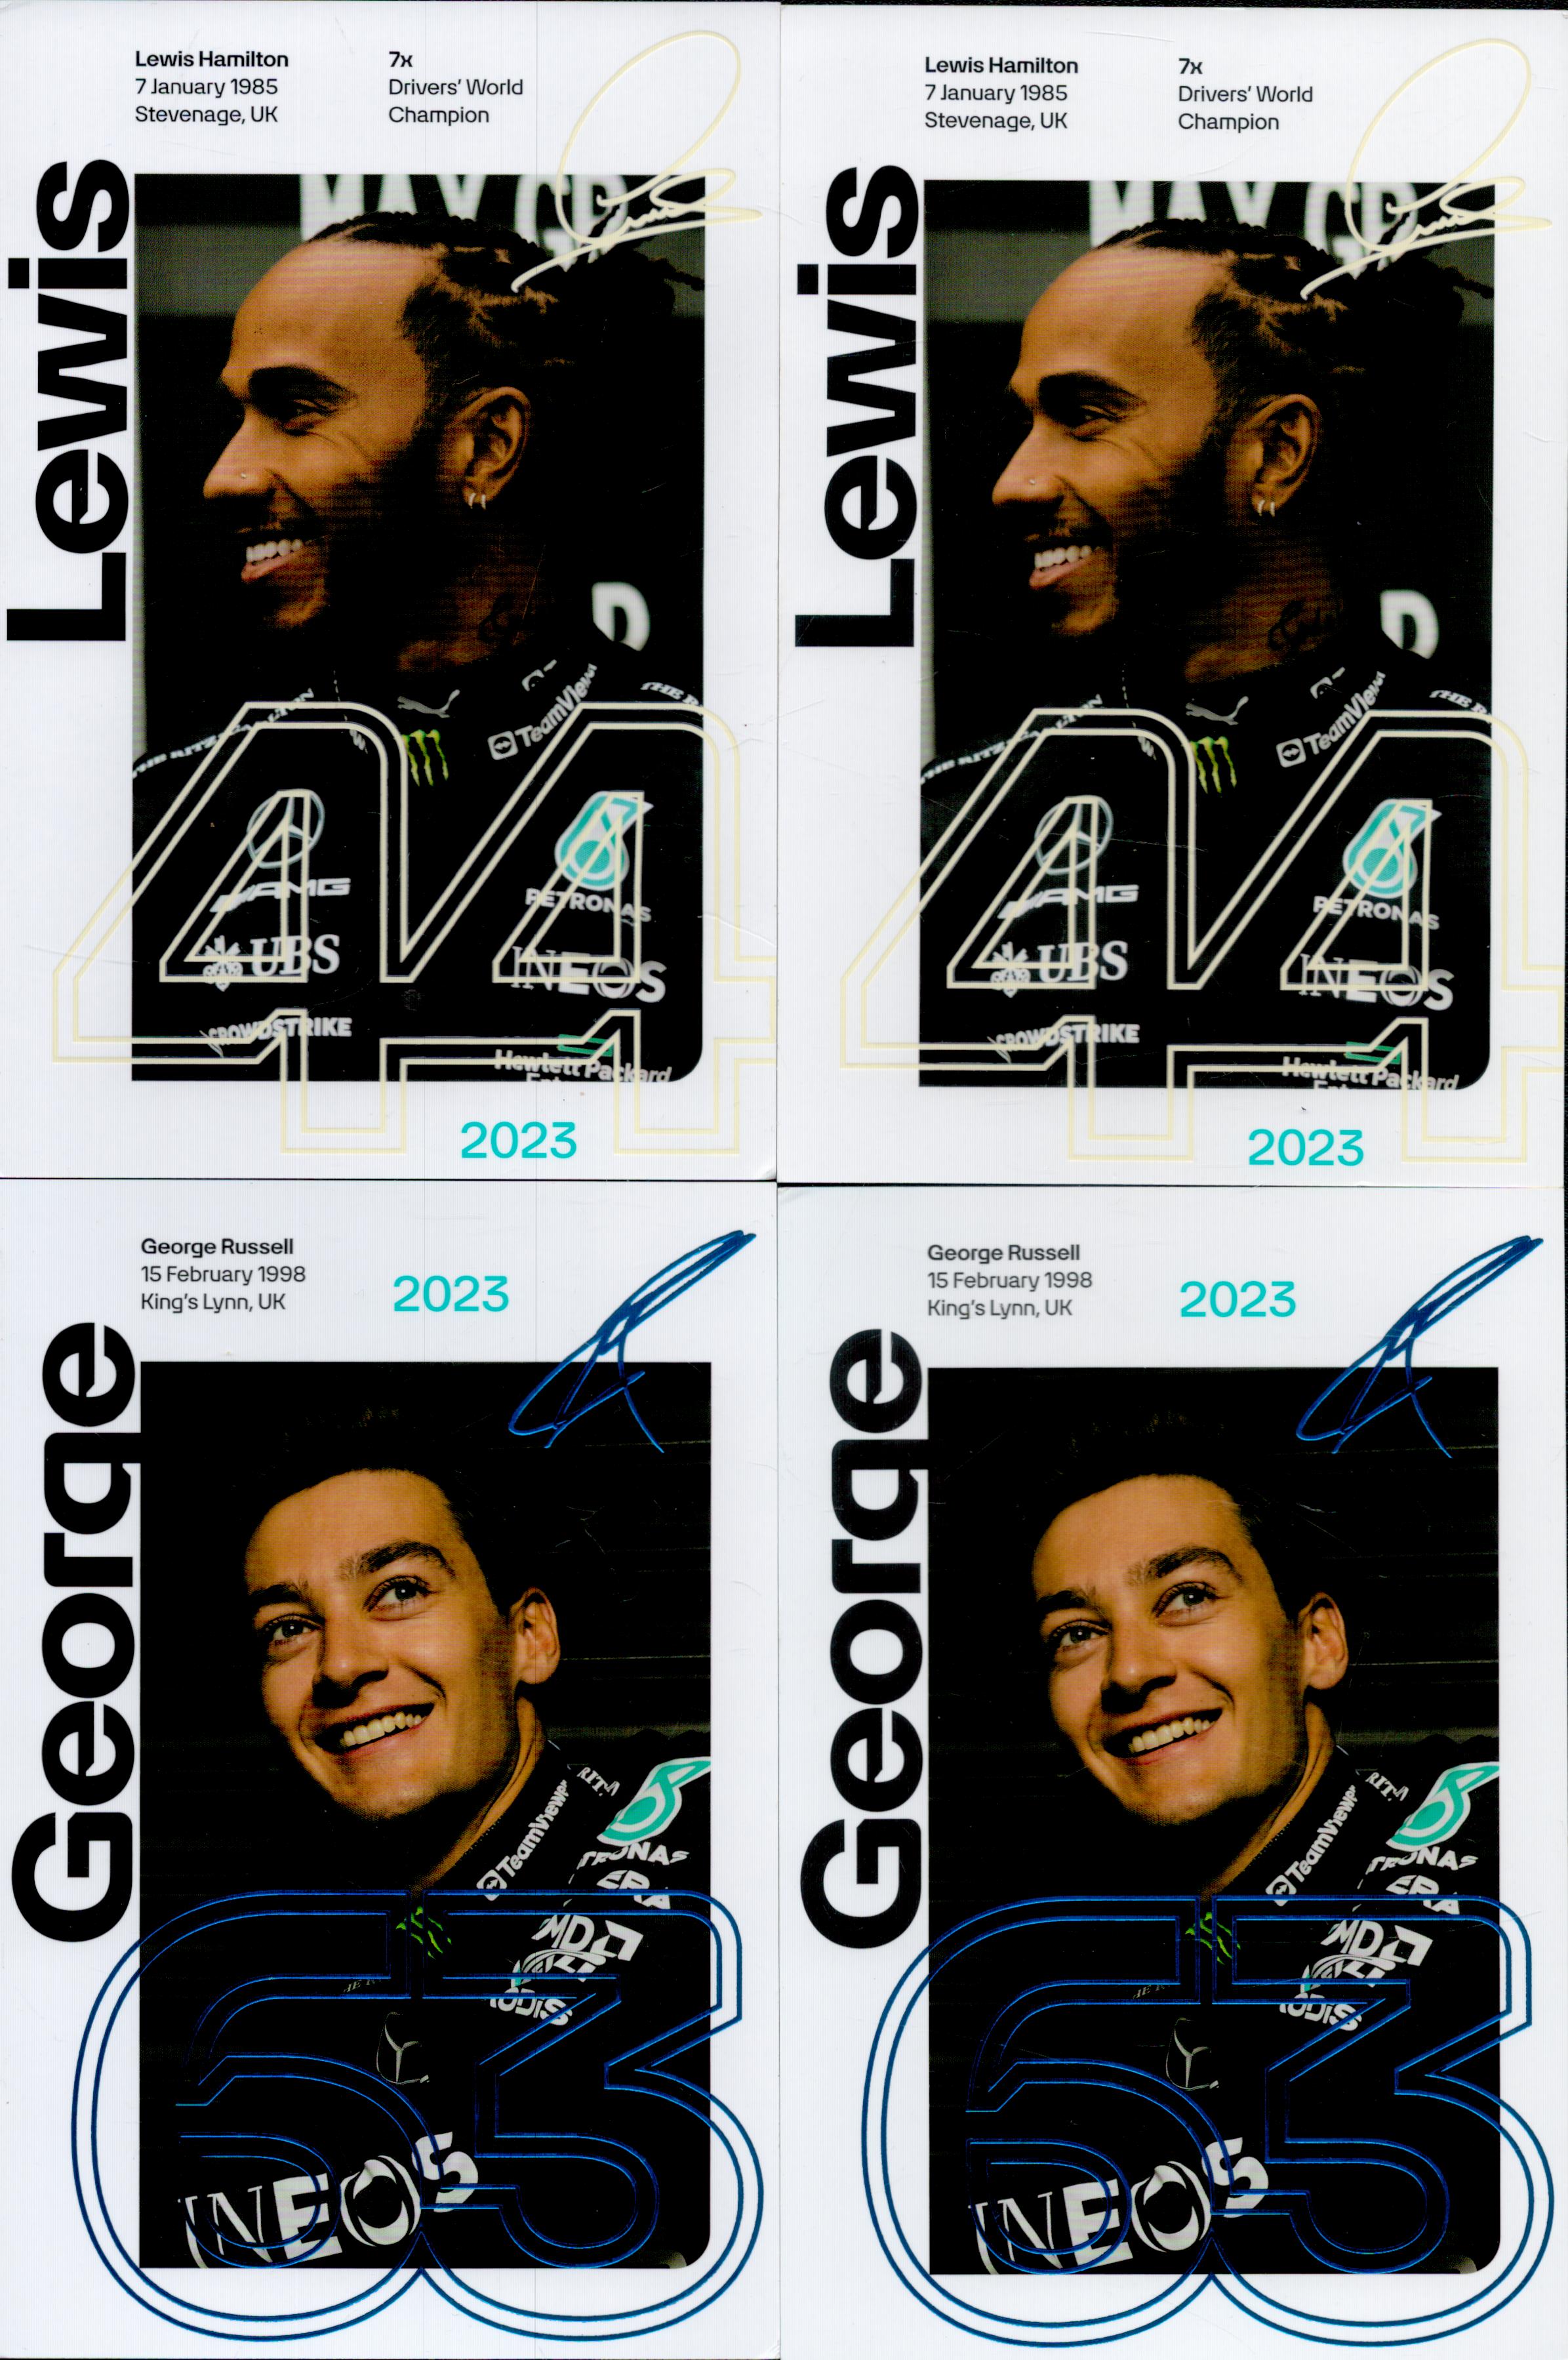 Mercedes 2023 Formula One collection 4, printed signature 6x4 promo photos two by Lewis Hamilton and